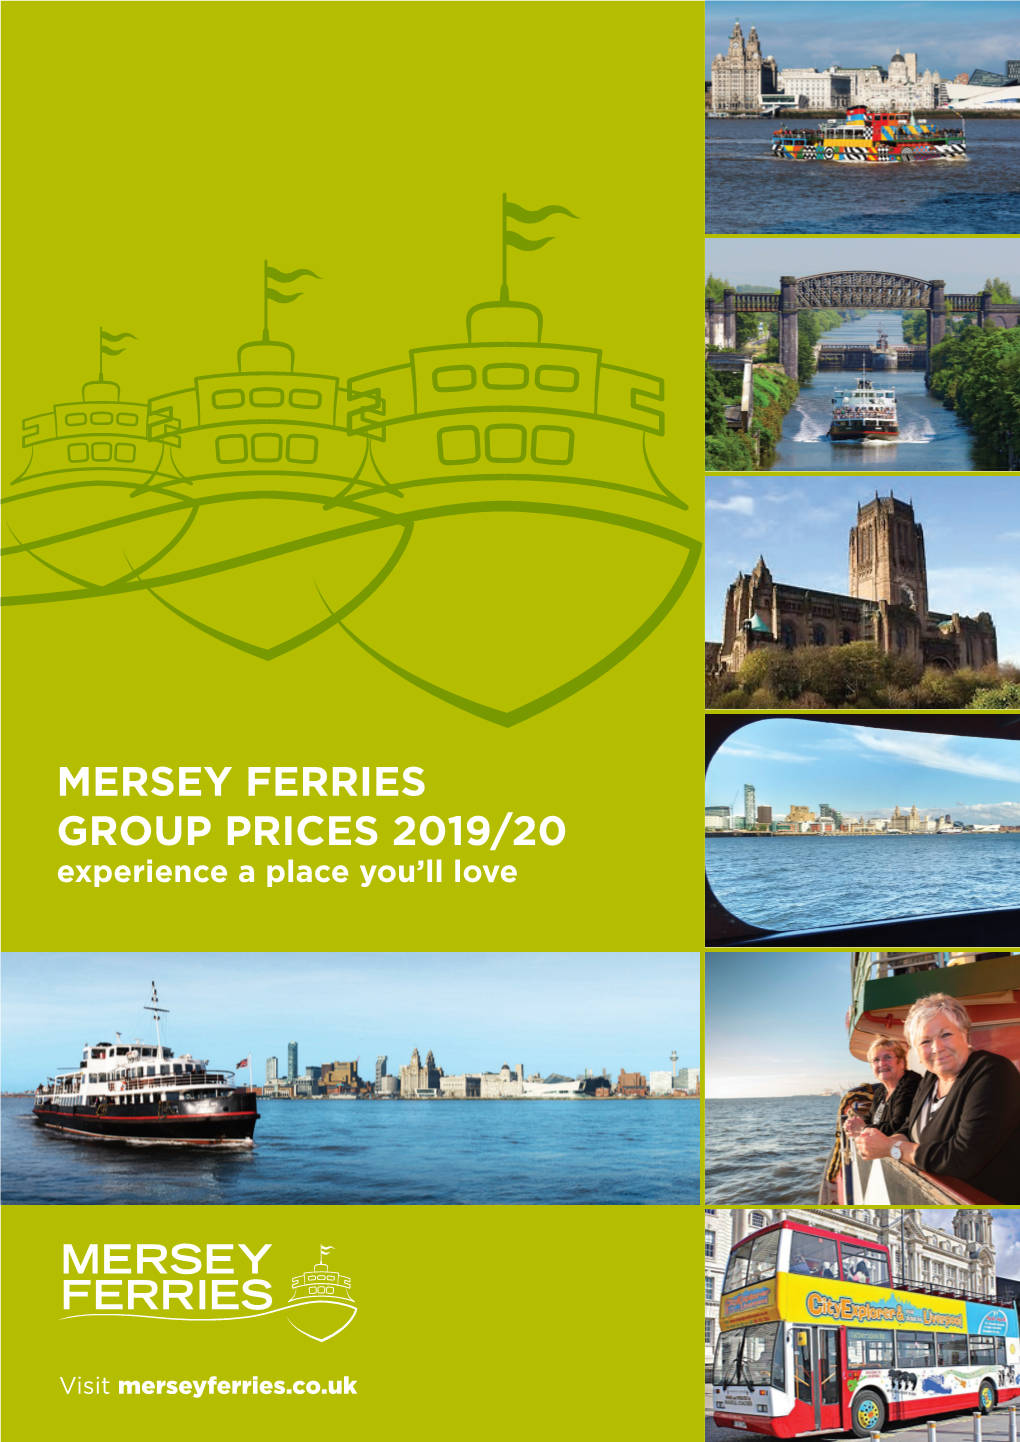 Mersey Ferries Group Prices 2019/20